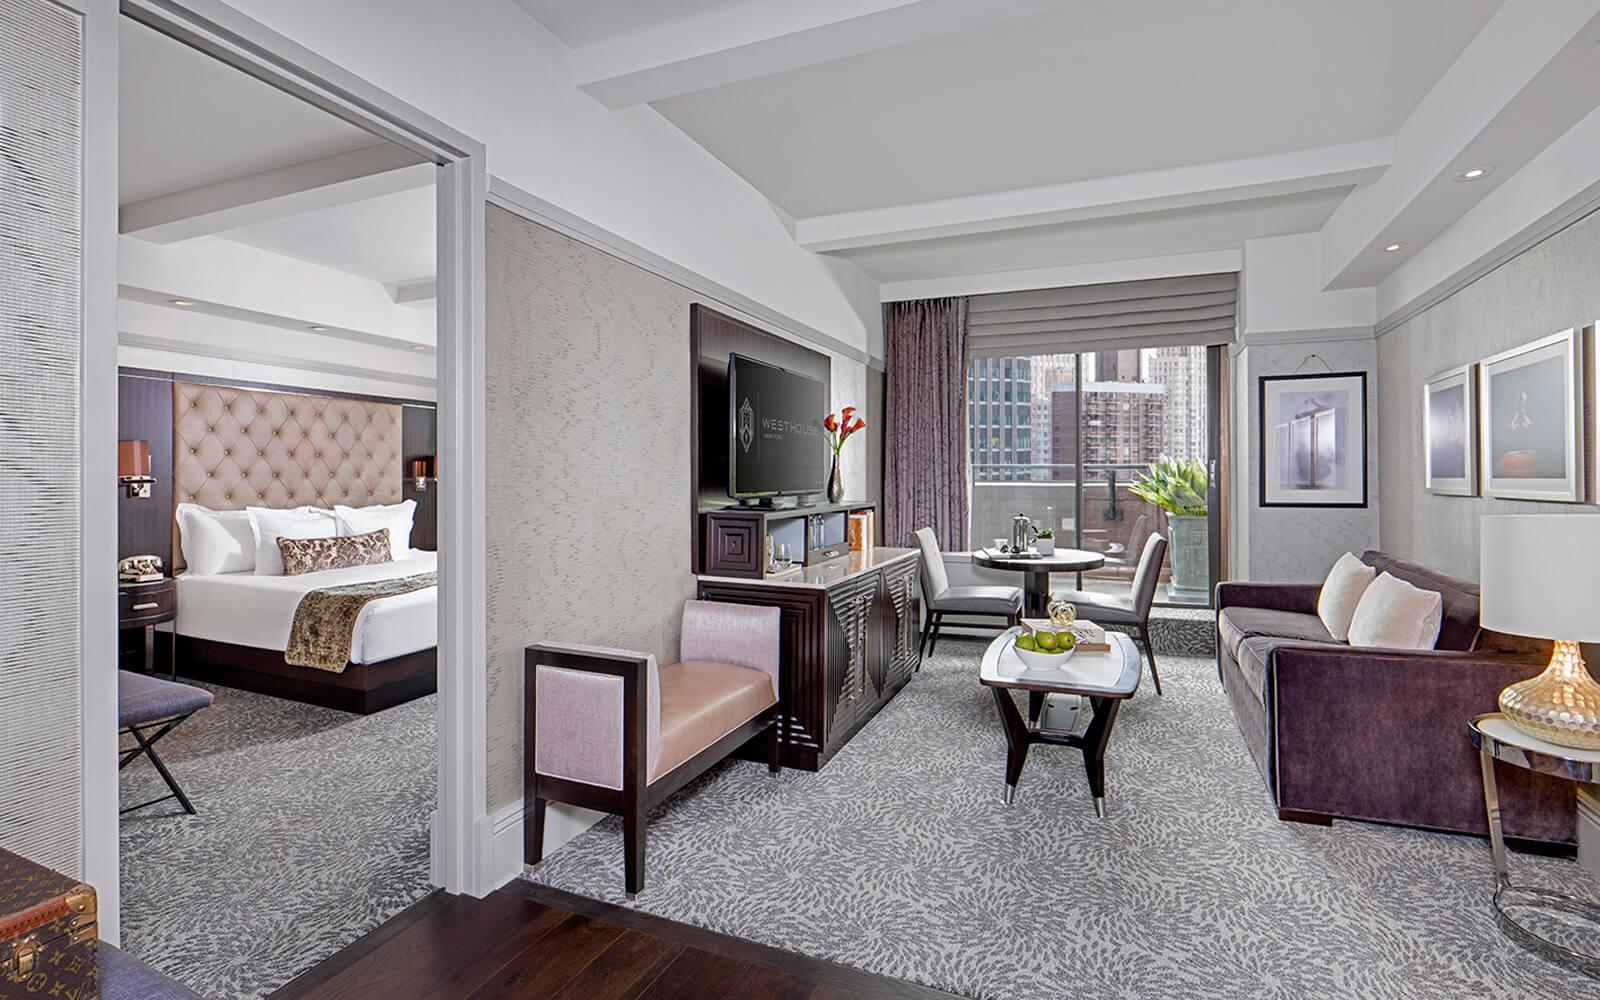 WestHouse Hotel New York Living Room Terrace Suite